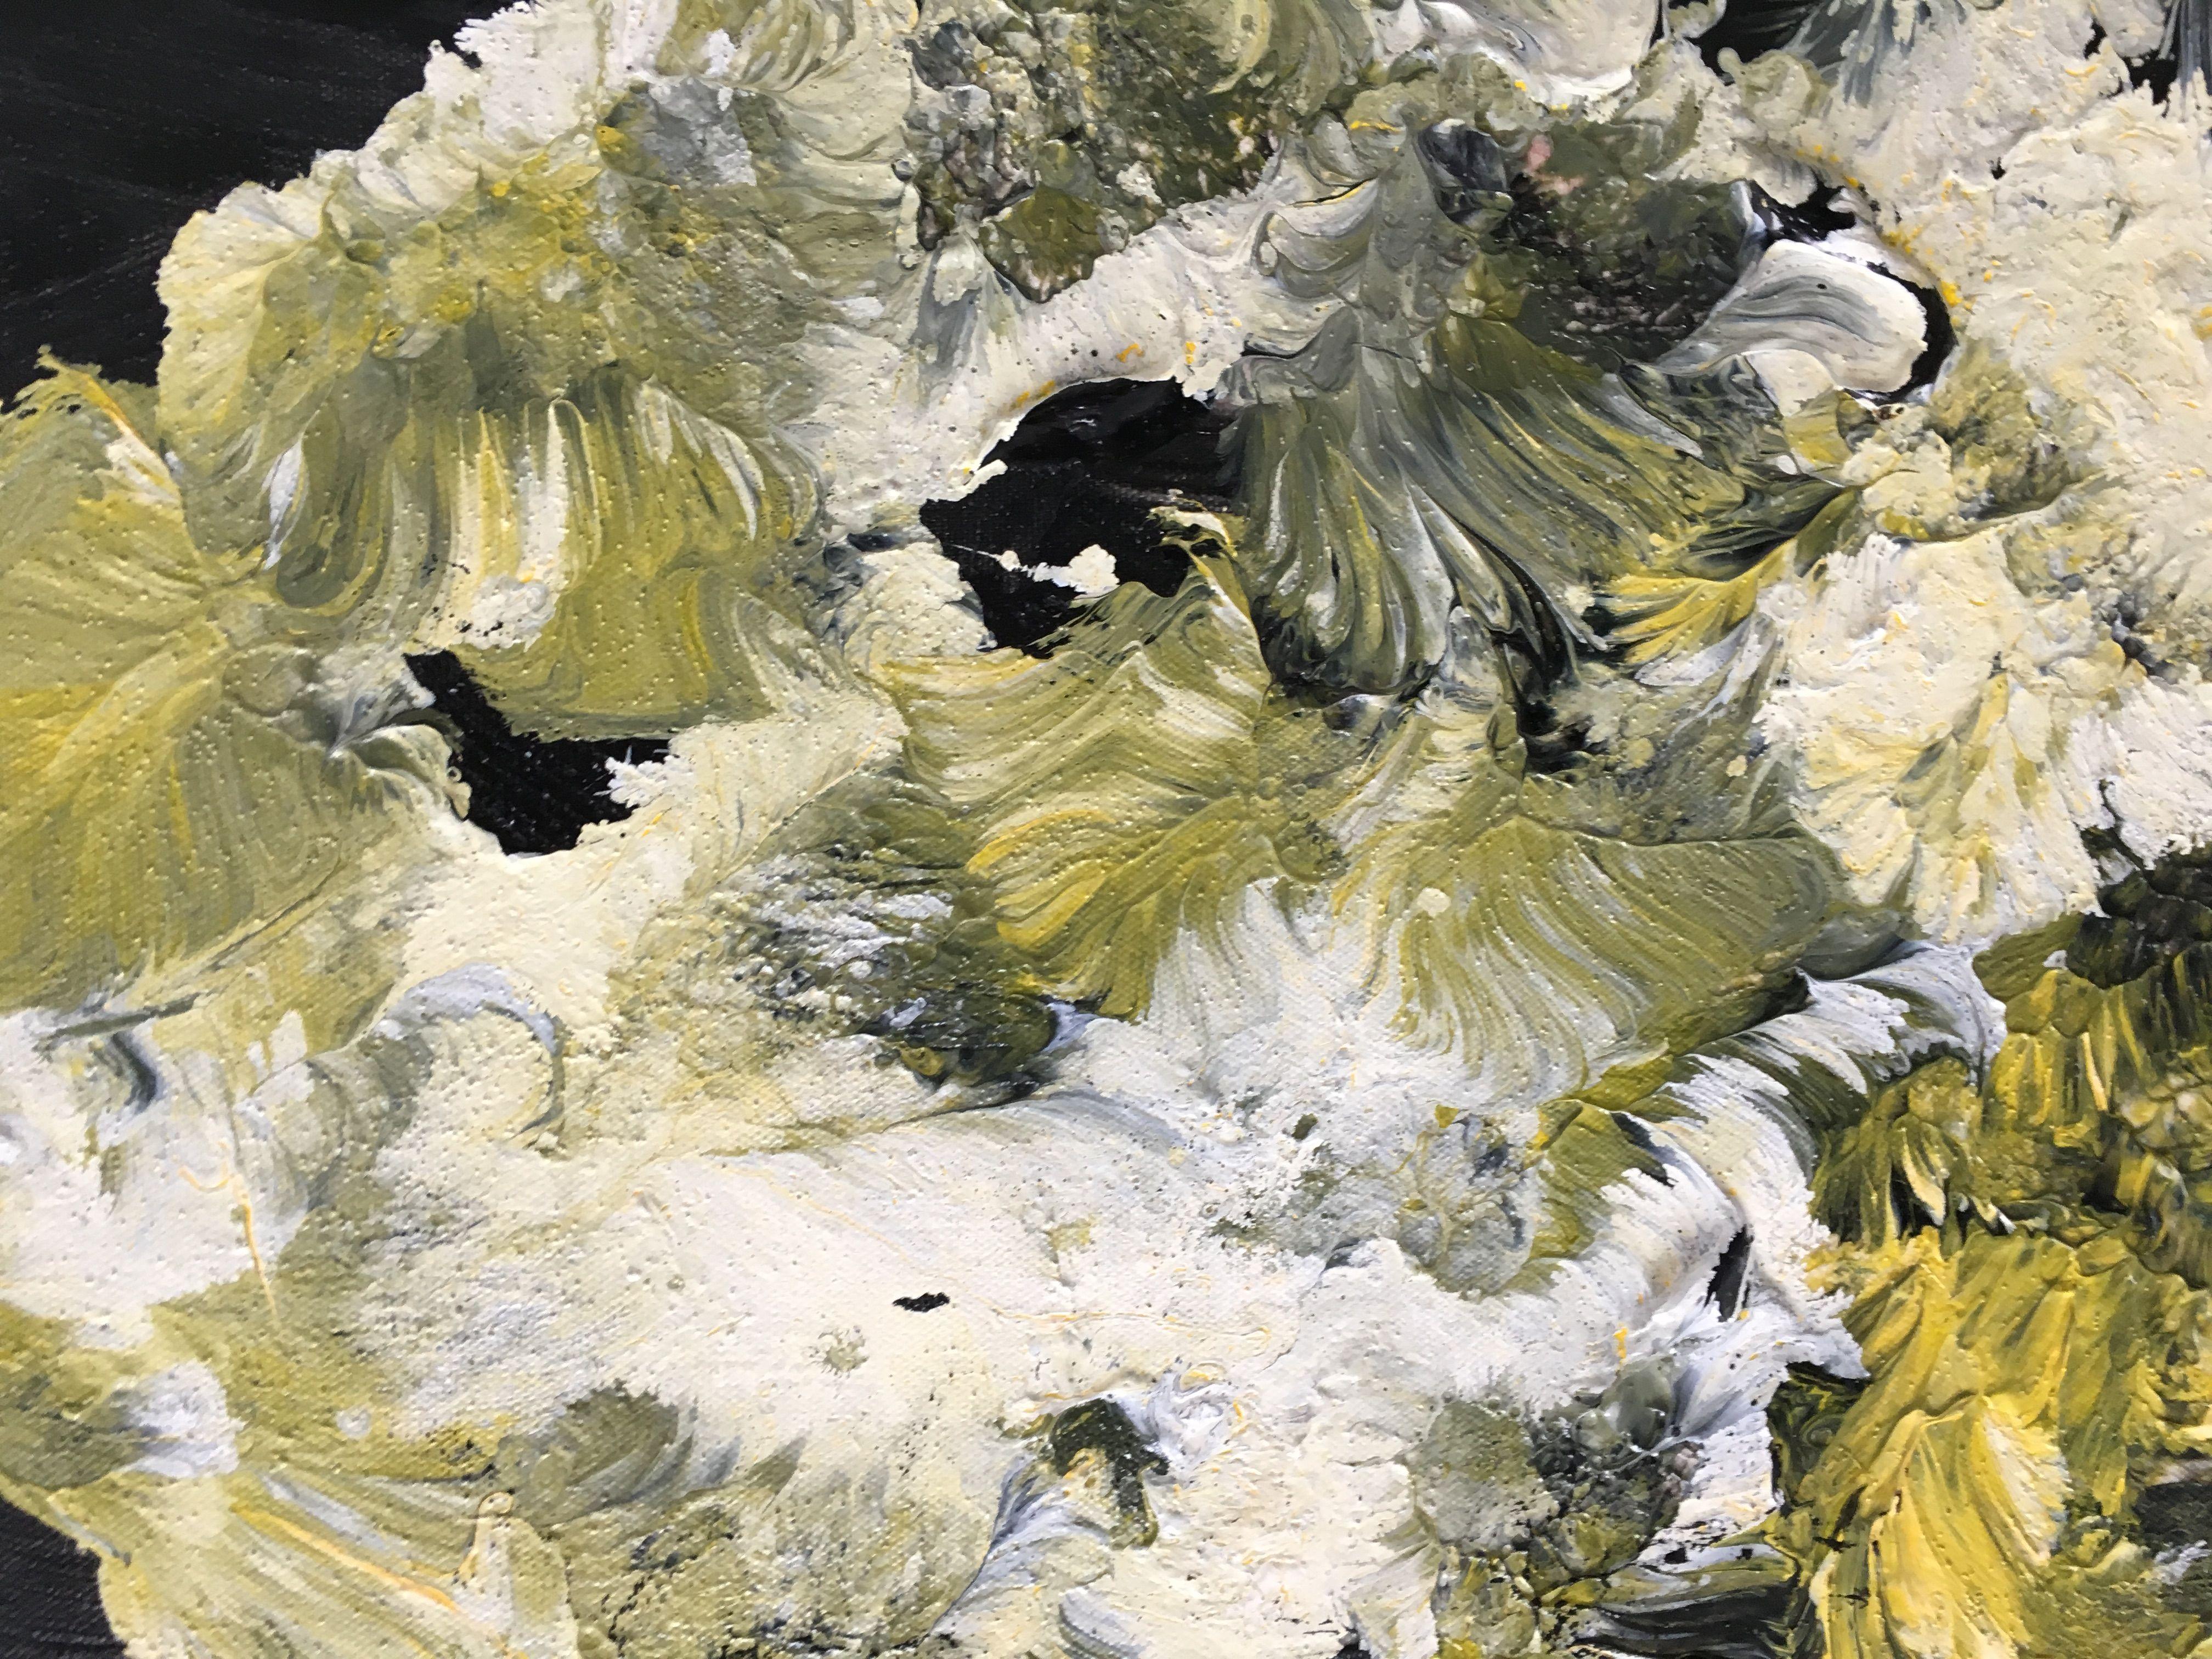 This painting is heavy bodied and was painted in fluid motion.  In one direction, you can find several abstract faces of polar bears or wolves at the top of the painting. In the other direction, it looks like there is  another animal. Its's edges